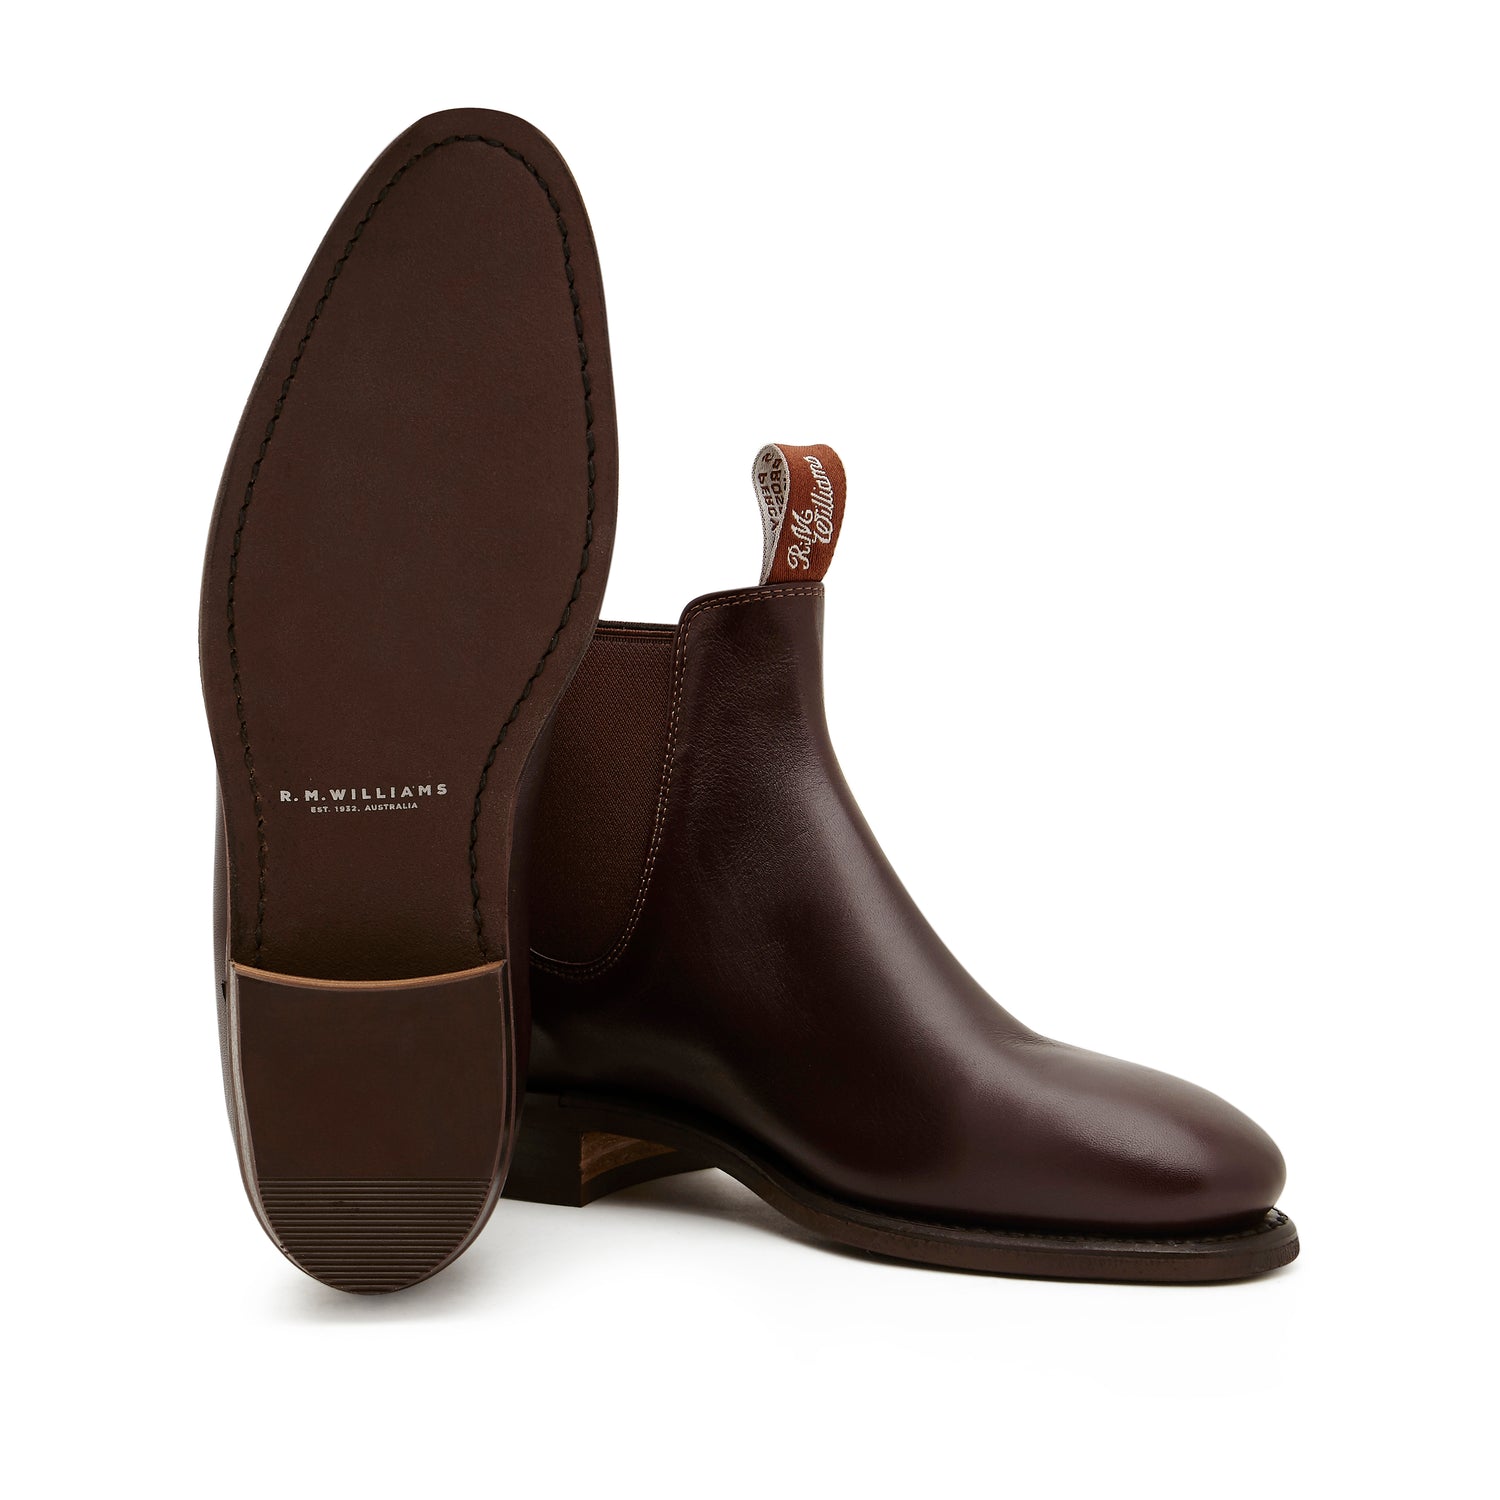 Adelaide Rubber Sole Boots - Chestnut